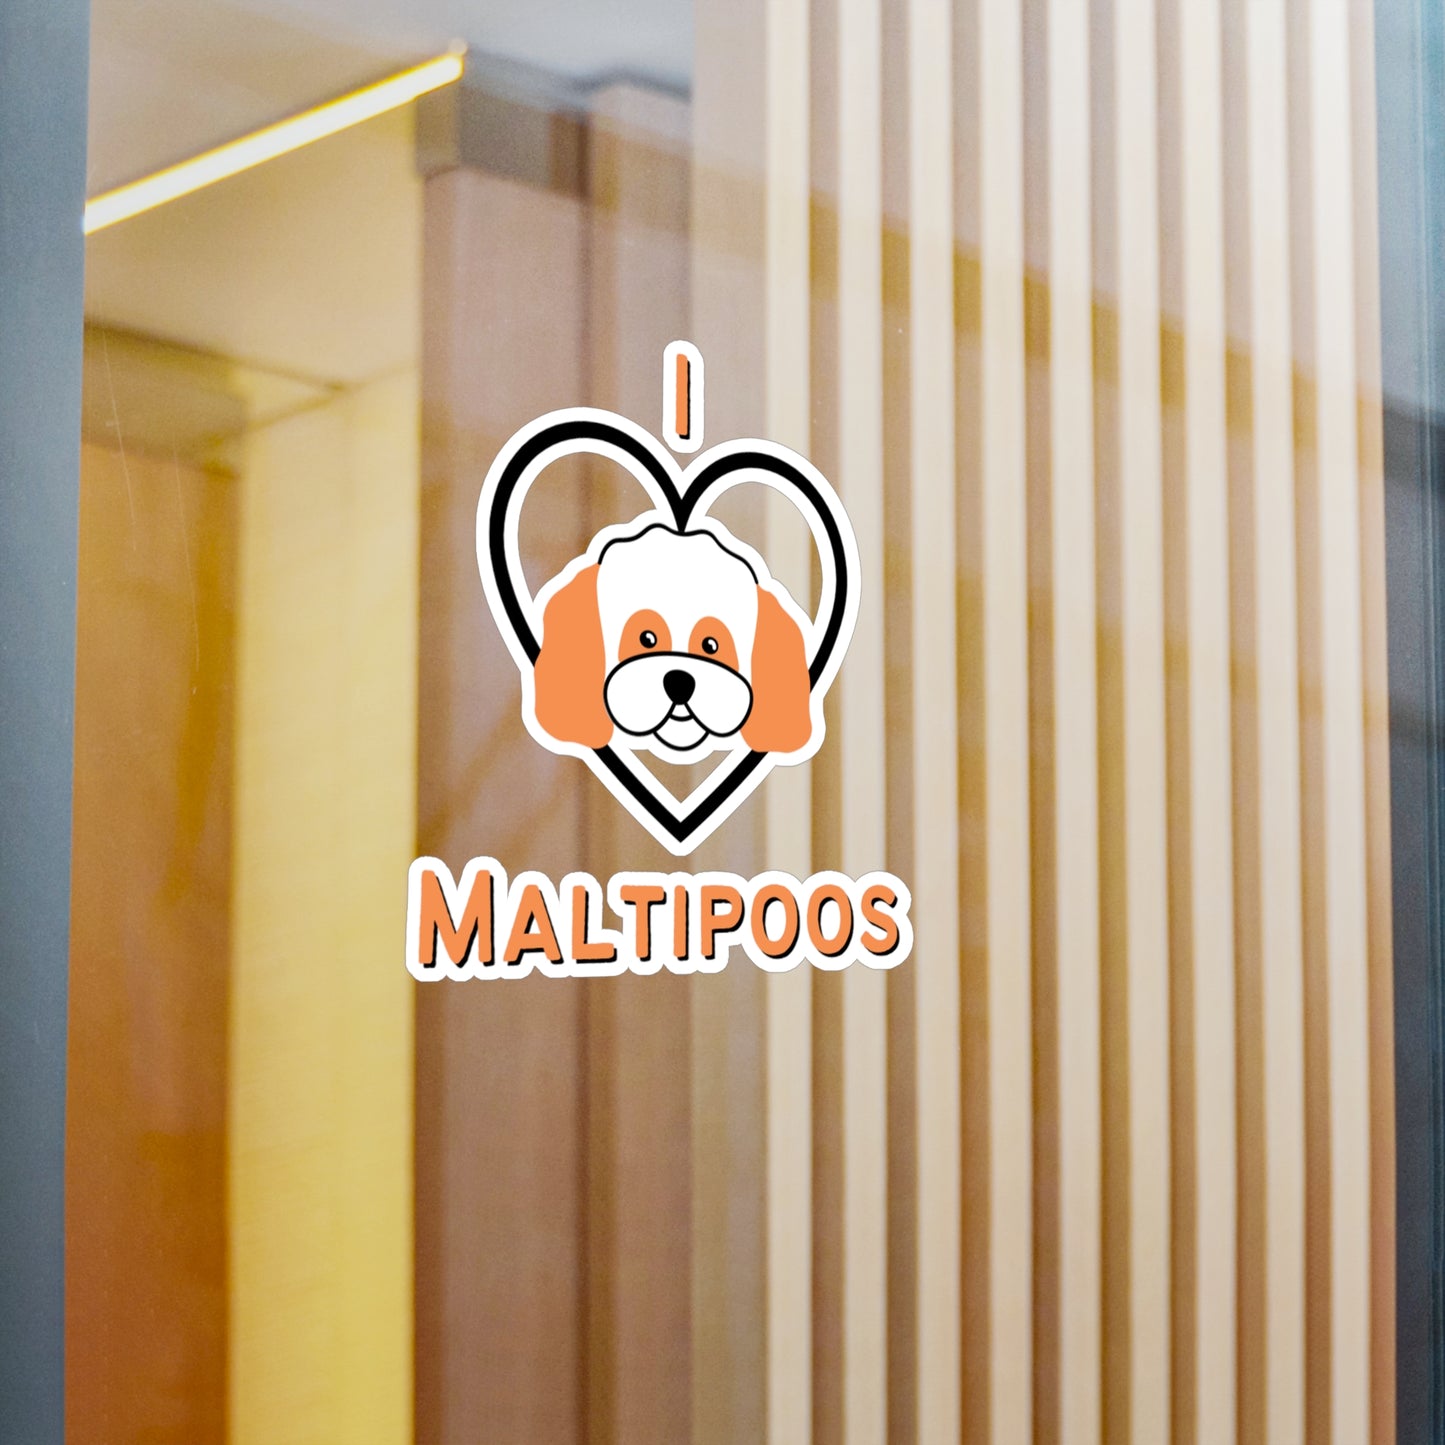 "I Love Maltipoos" Vinyl Sticker - Weave Got Gifts - Unique Gifts You Won’t Find Anywhere Else!